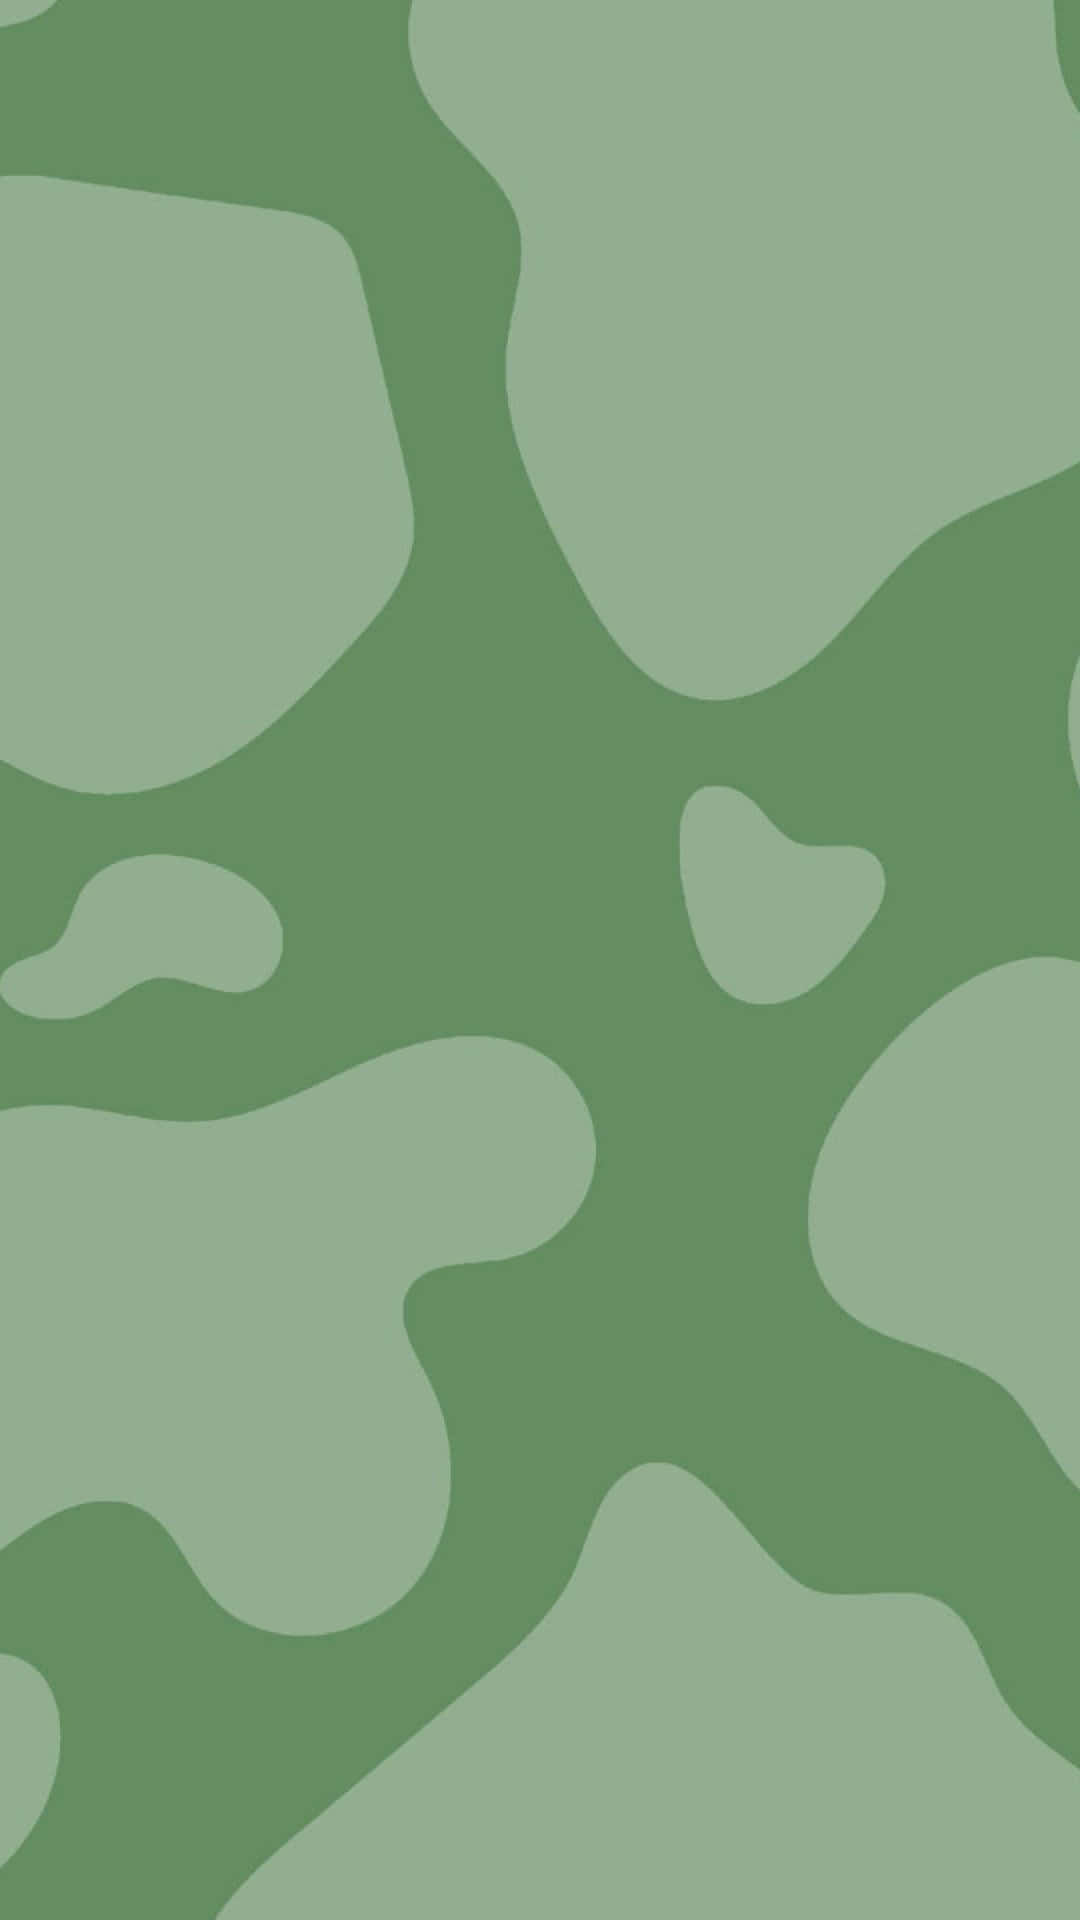 A Green Camouflage Pattern With A Few Small Dots